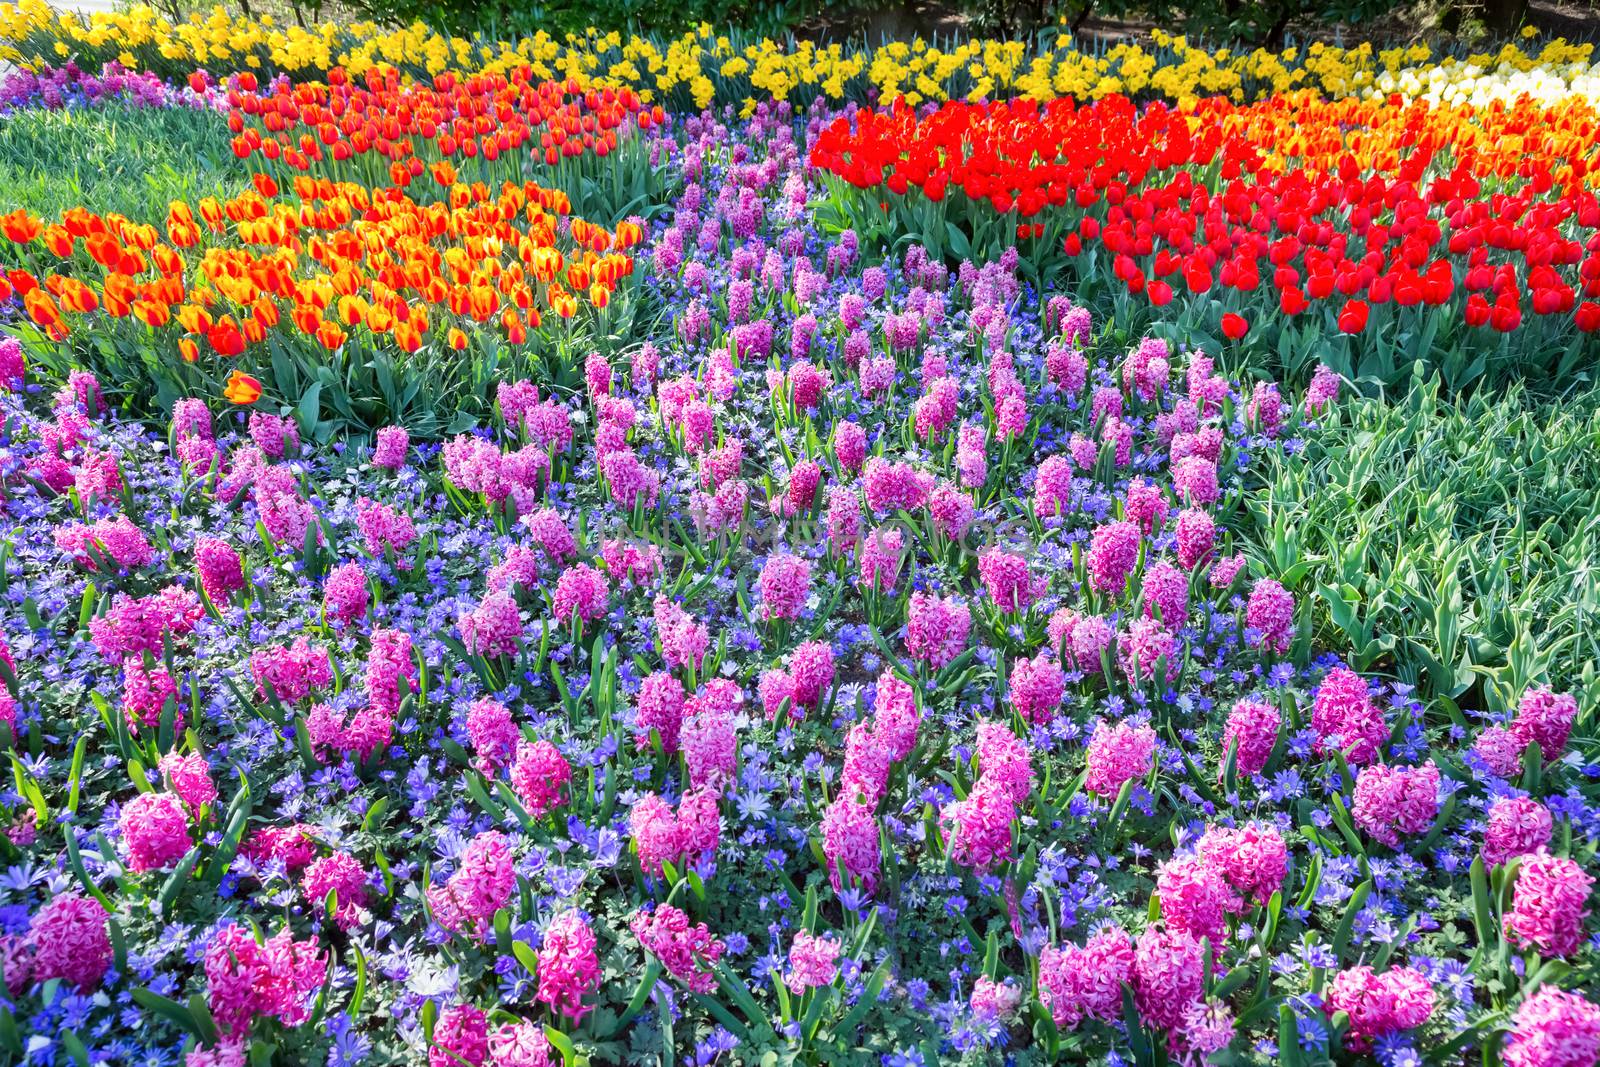 Field of pink hyacinths and red tulips by BenSchonewille